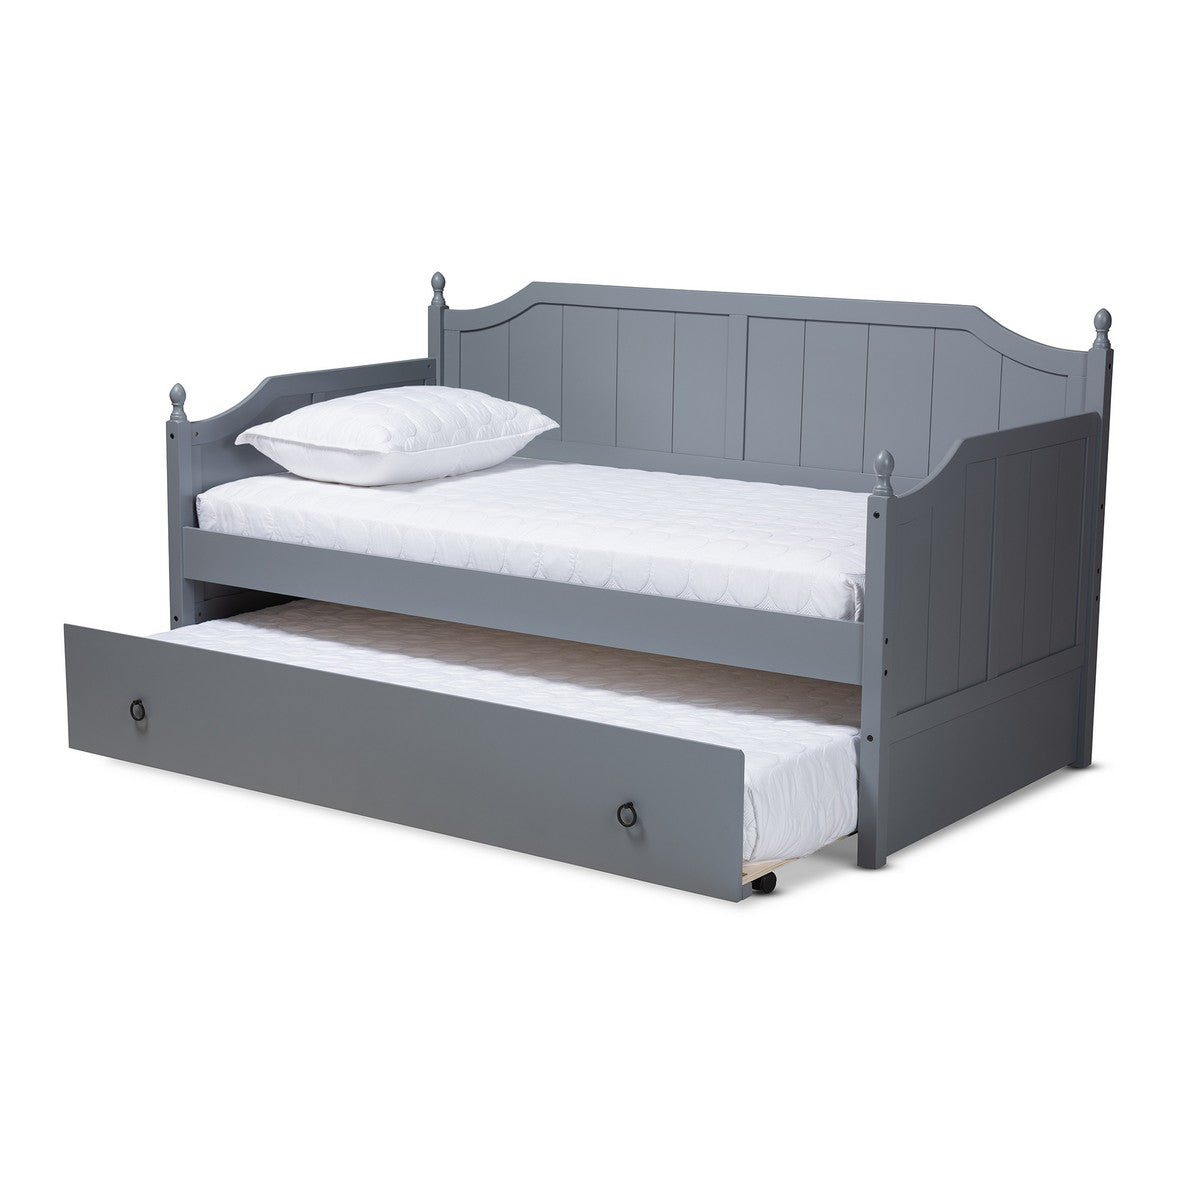 Baxton Studio Millie Cottage Farmhouse Grey Finished Wood Twin Size Daybed with Trundle Baxton Studio-daybed-Minimal And Modern - 1